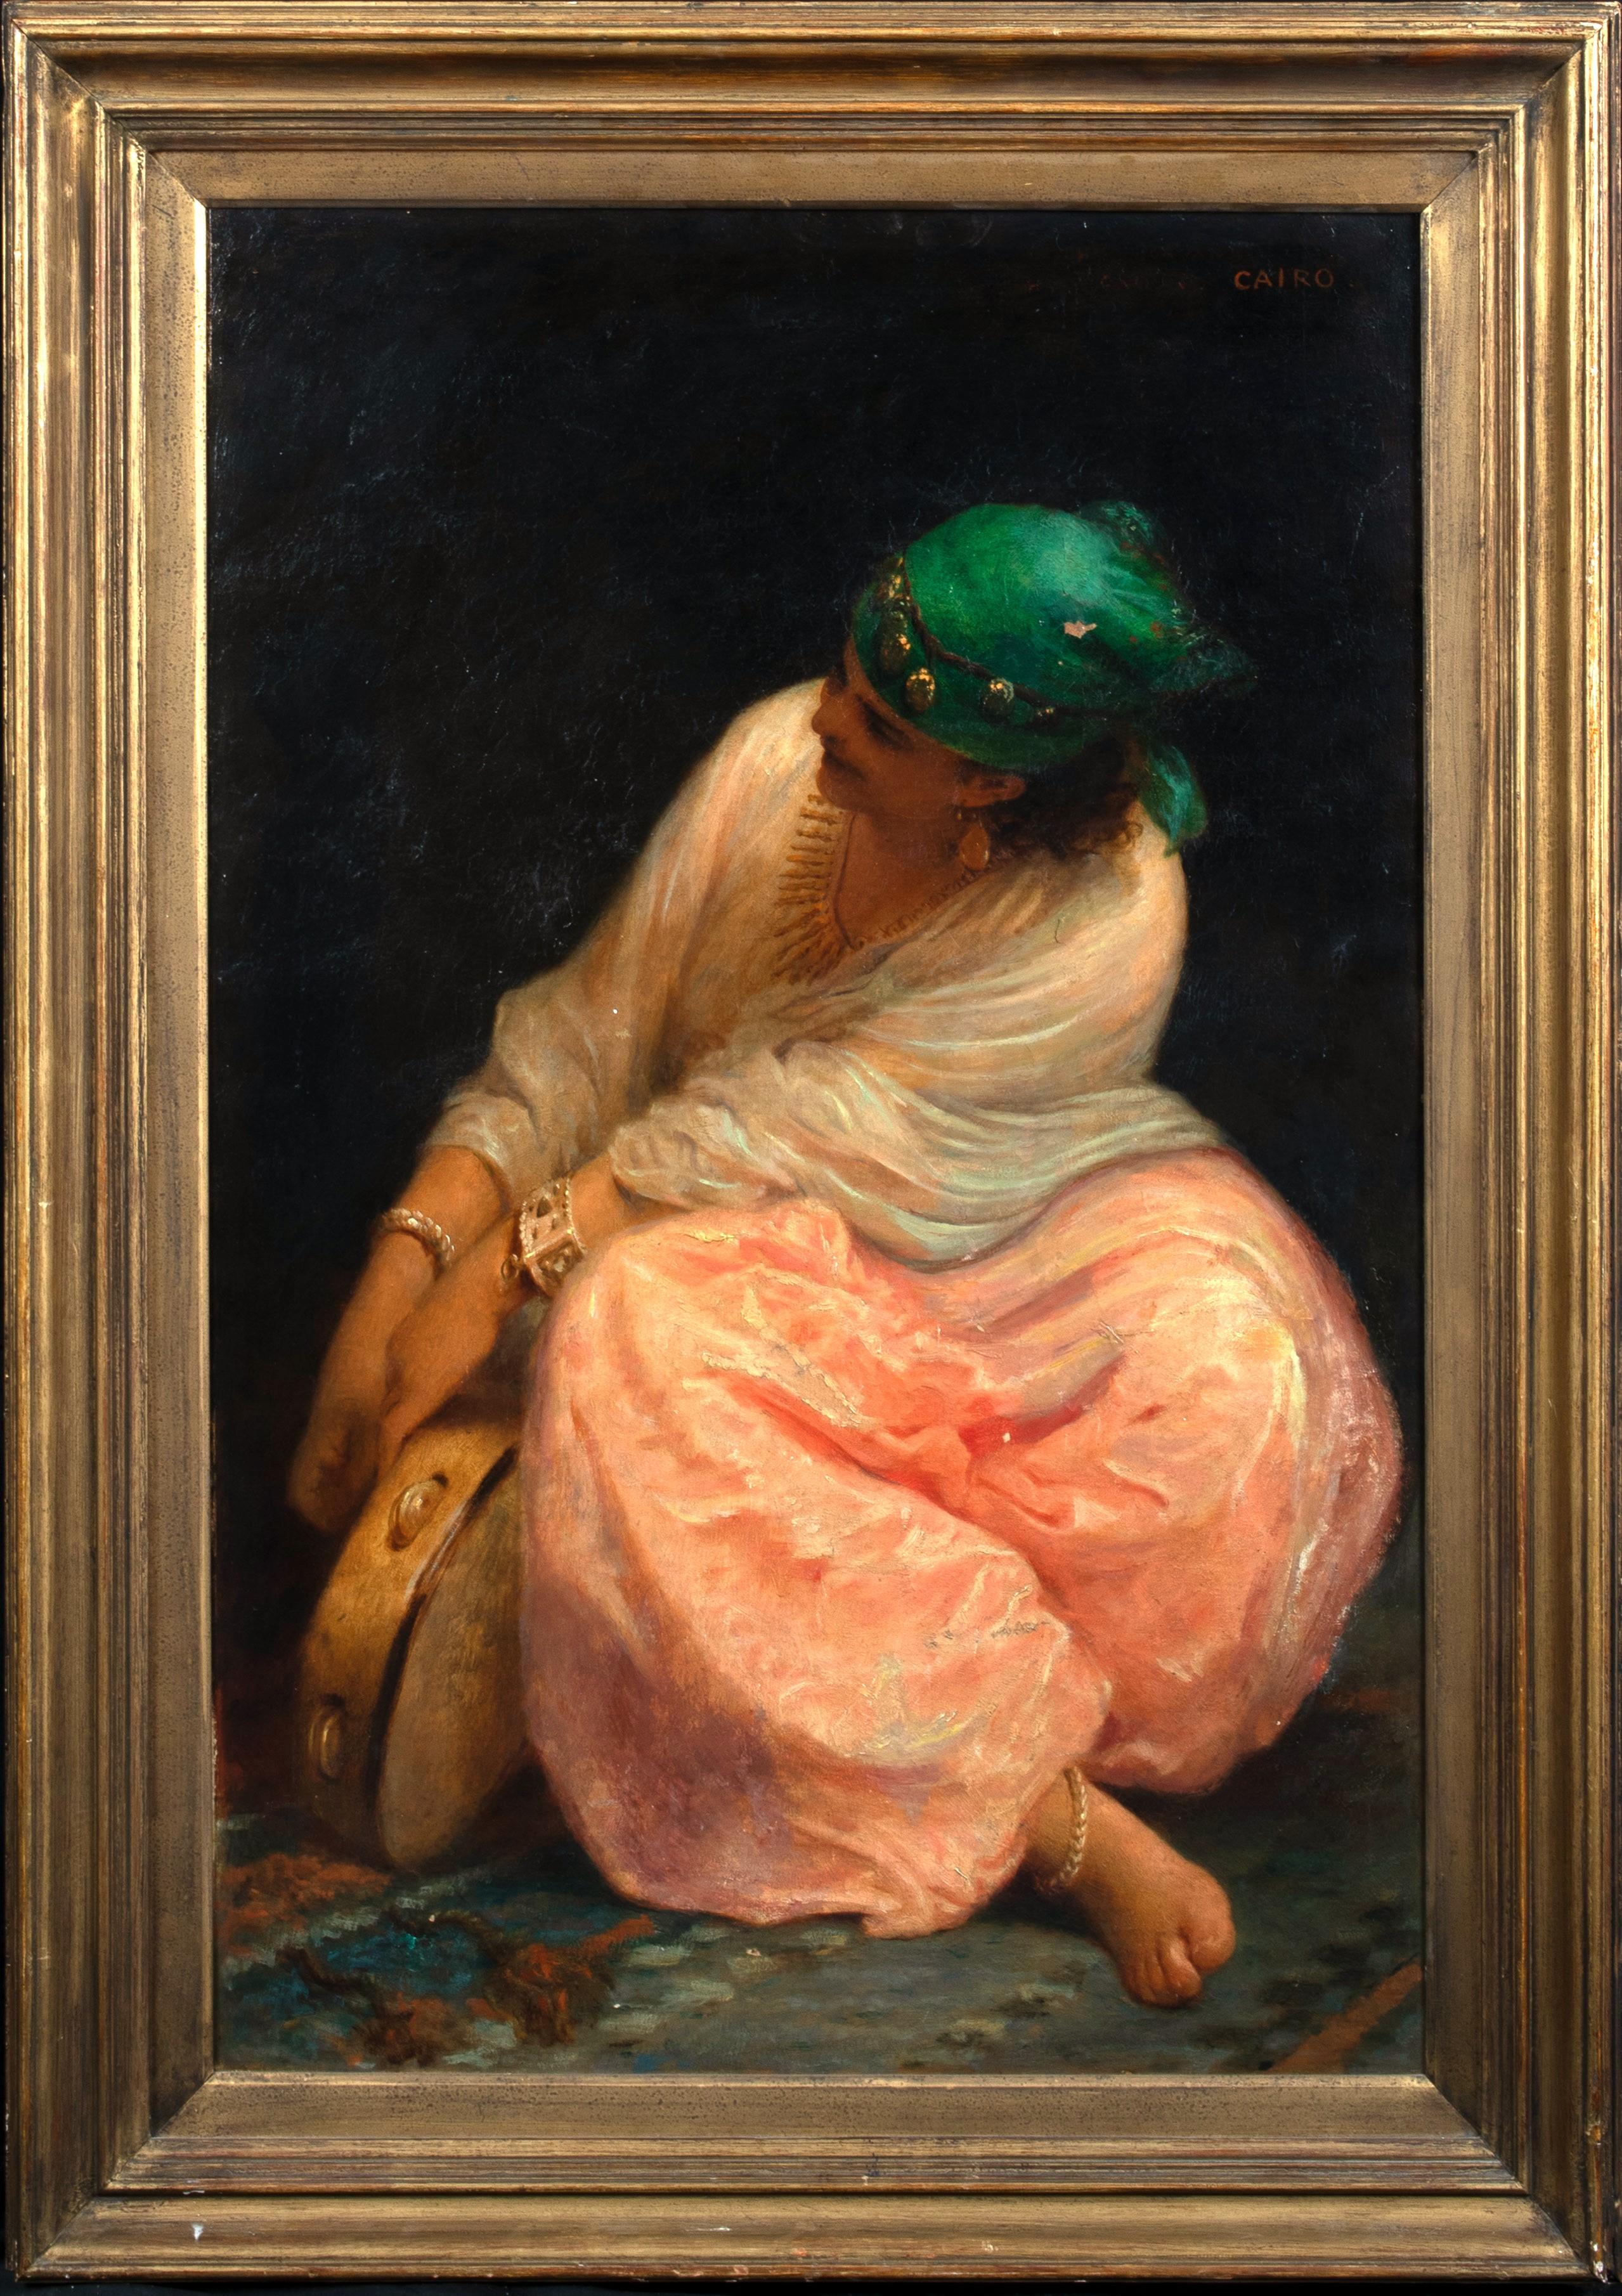 Unknown Portrait Painting - The Light Of The Hareem, Cairo, 19th Century by JOHN MORGAN (1823-1886)